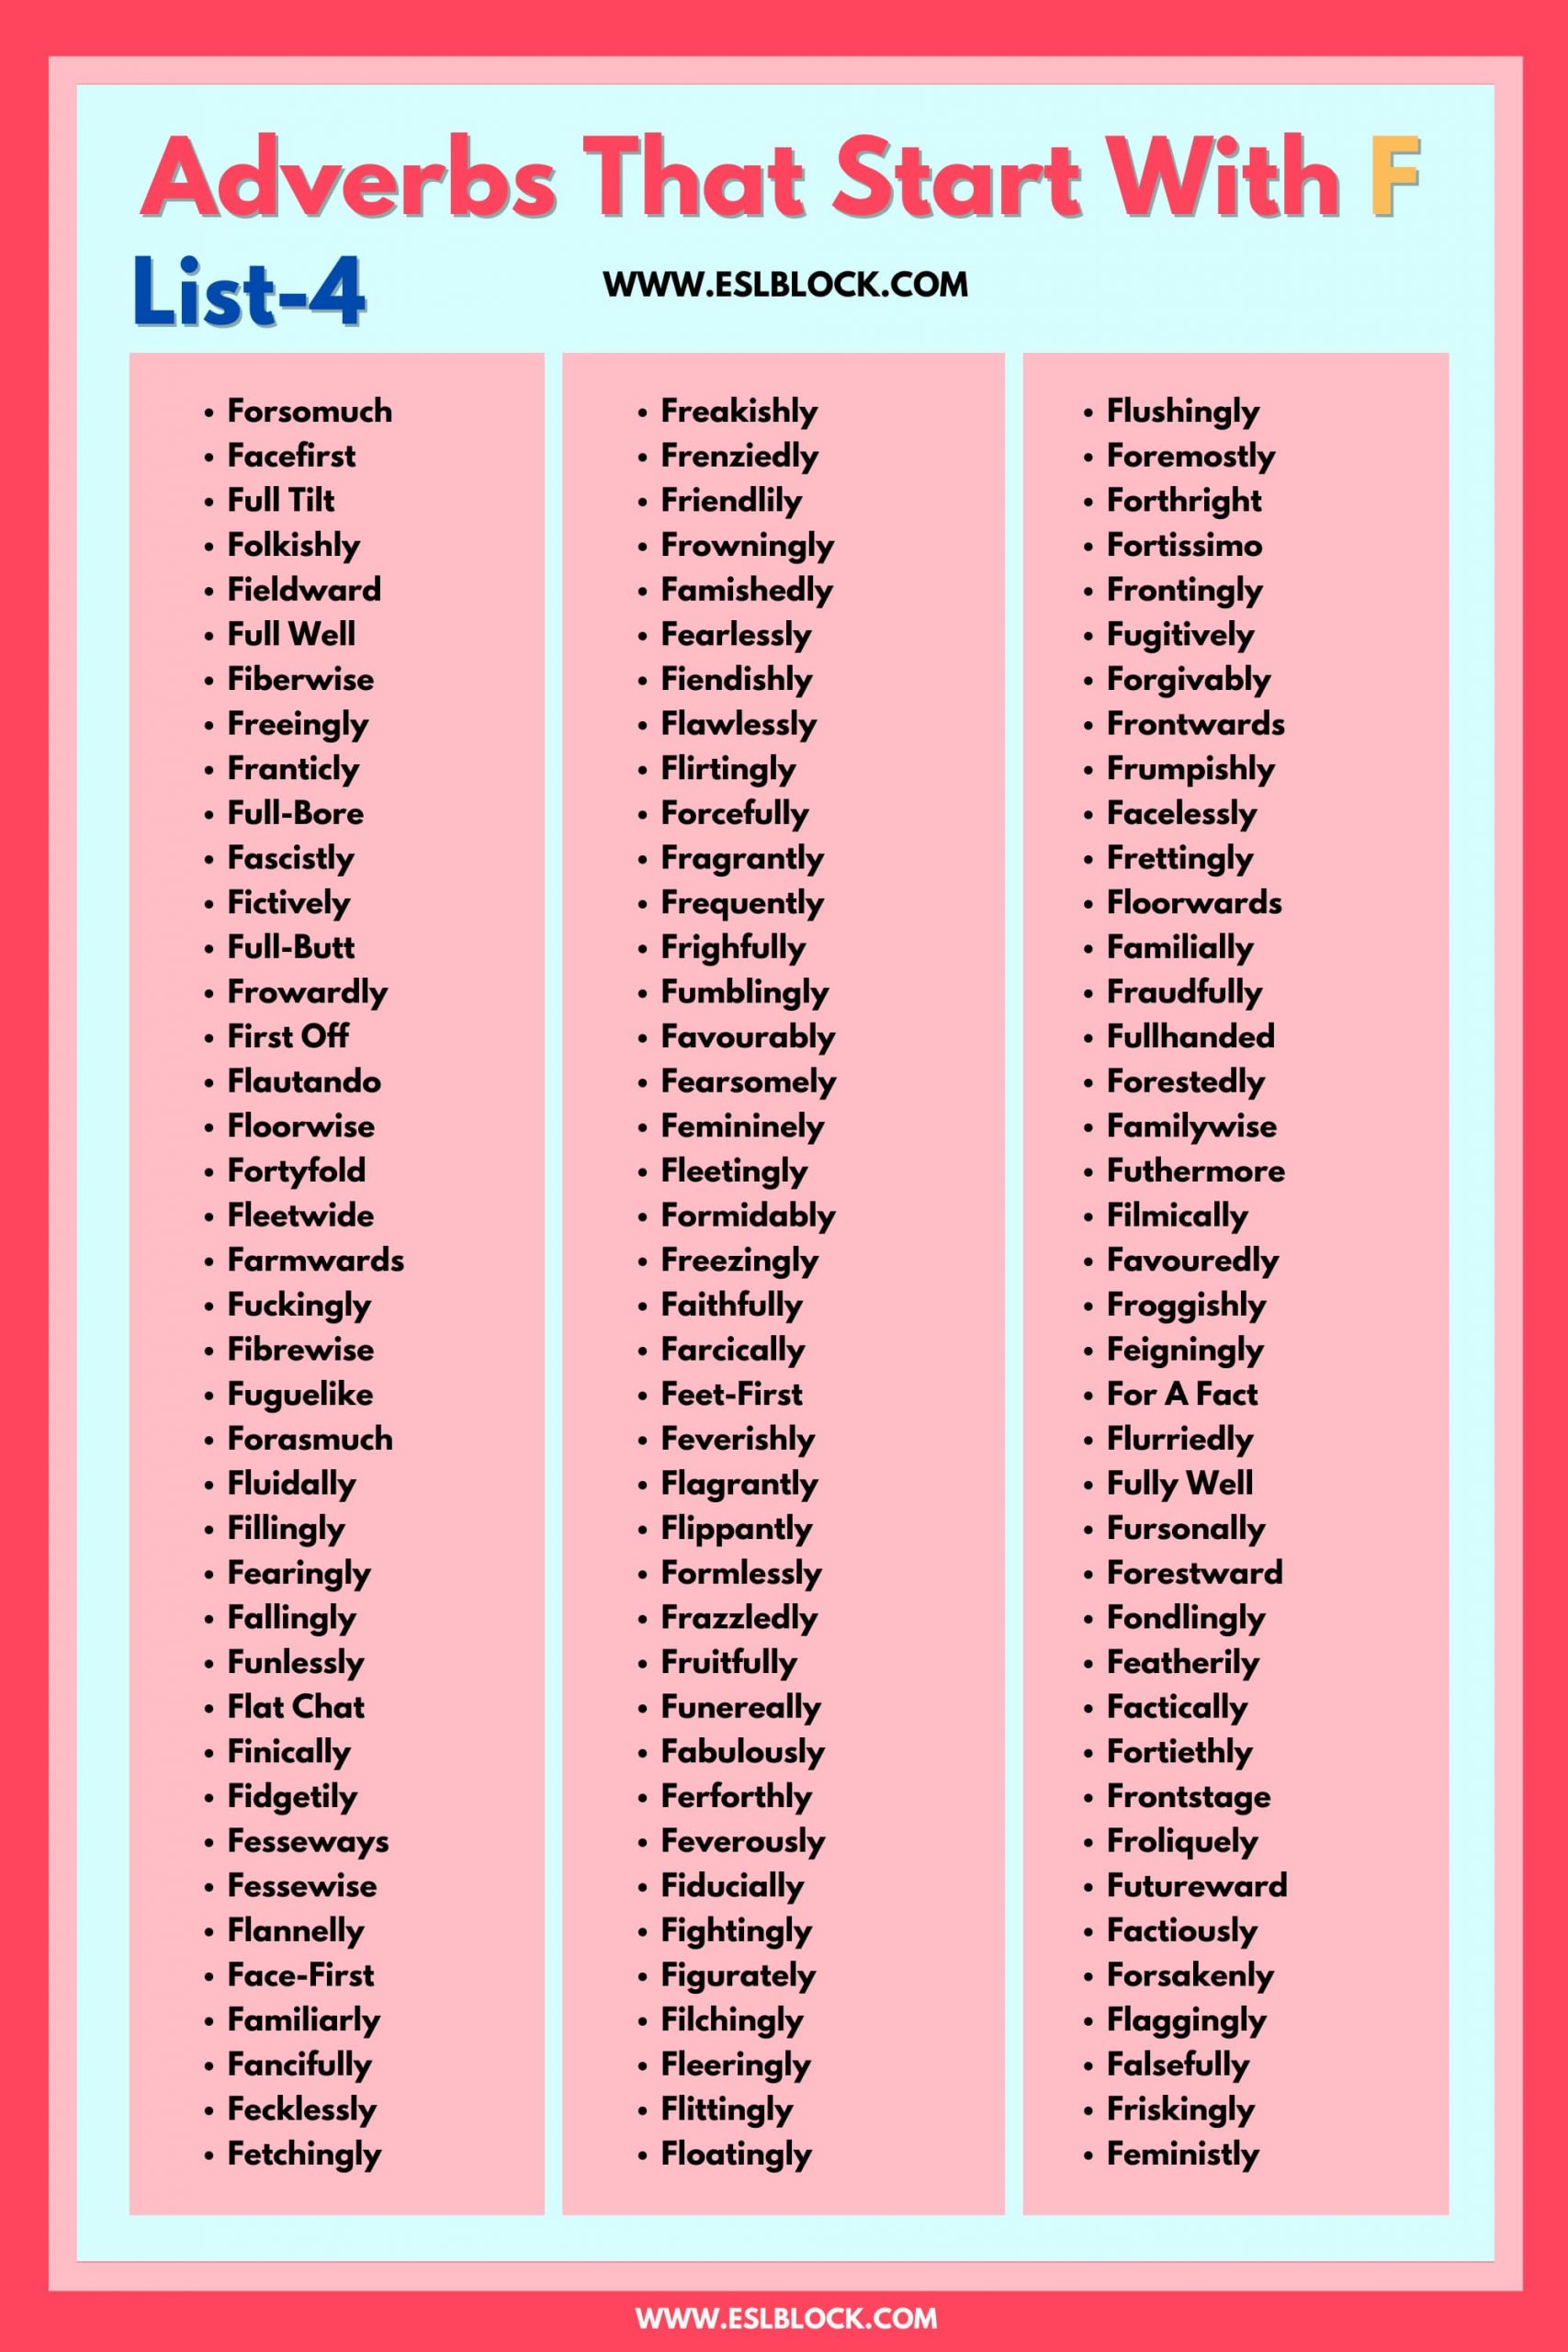 100 Example Sentences Using Adverbs, 4 Letter Adverbs That Start with F, 4 Letter Words, 5 Letter Adverbs That Start with F, 5 Letter Words, 6 Letter Adverbs That Start with F, 6 Letter Words, A to Z Adverbs, AA Adverbs, Adverb vocabulary words, Adverbs, Adverbs That Start with F, Adverbs with Example Sentences, All Adverbs, Types of Adverbs, Types of Adverbs with Example Sentences, Vocabulary, What are Adverbs, What are the types of Adverbs, Words That with F